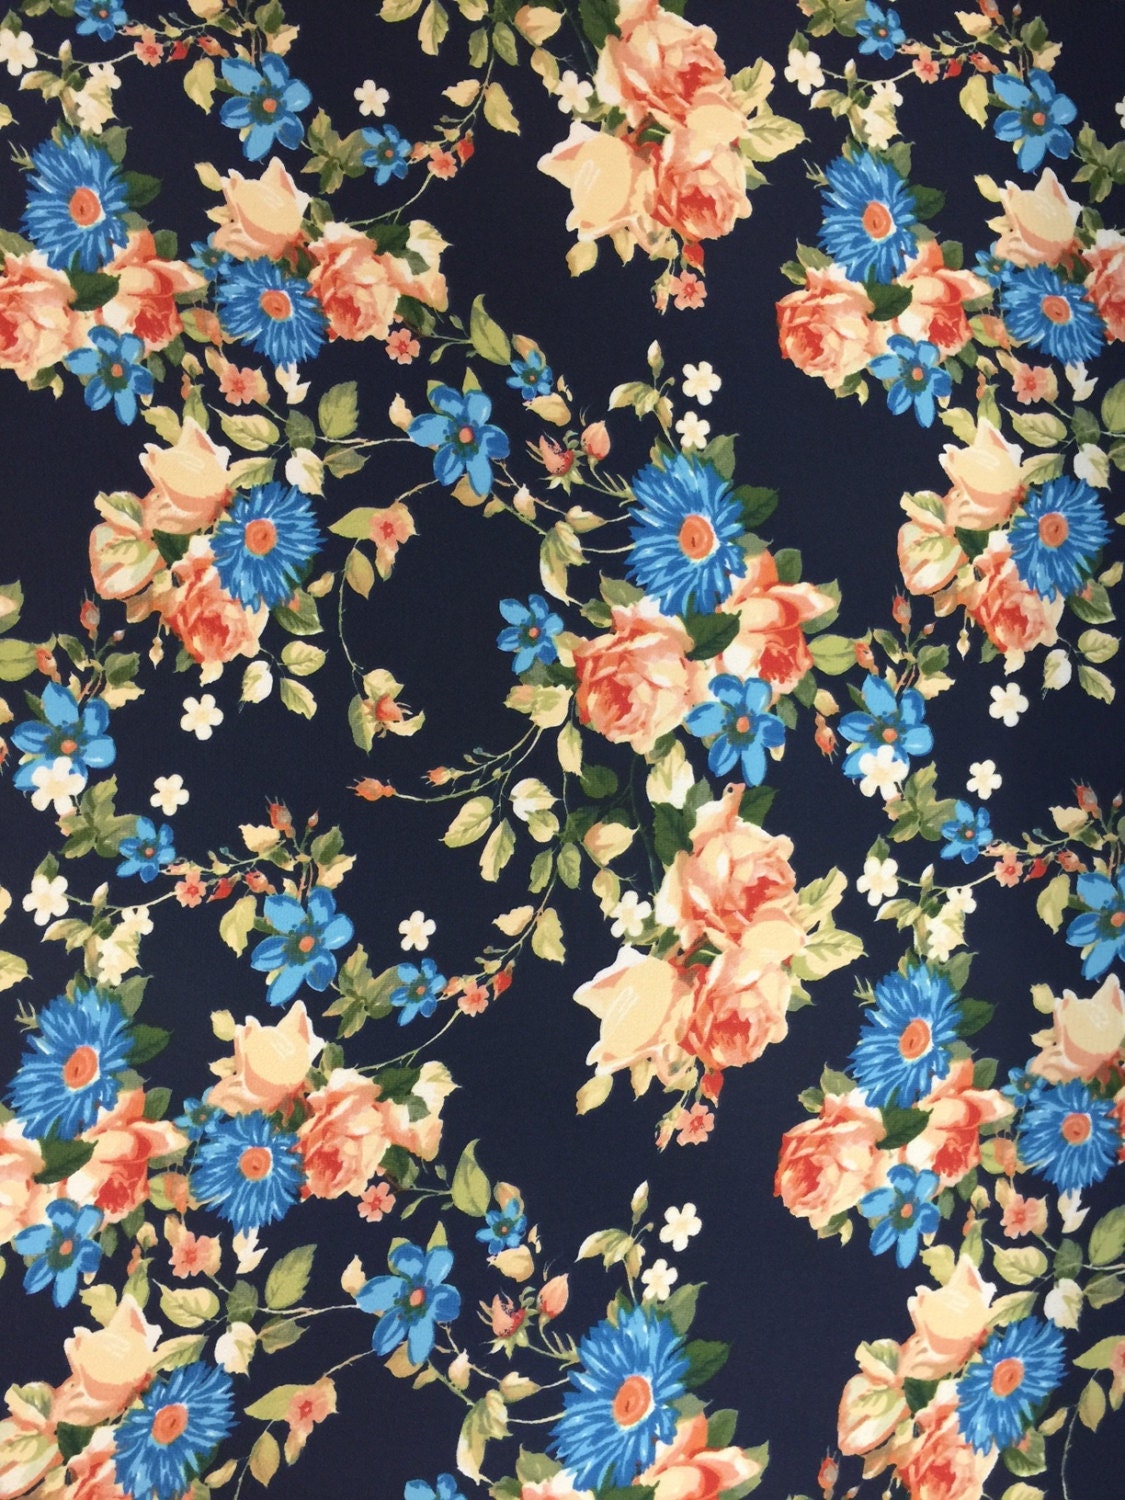 Polyester Crepe 2%Spandex Navy Peach 58-60 in w Fabric by the yard floral flowers crepe